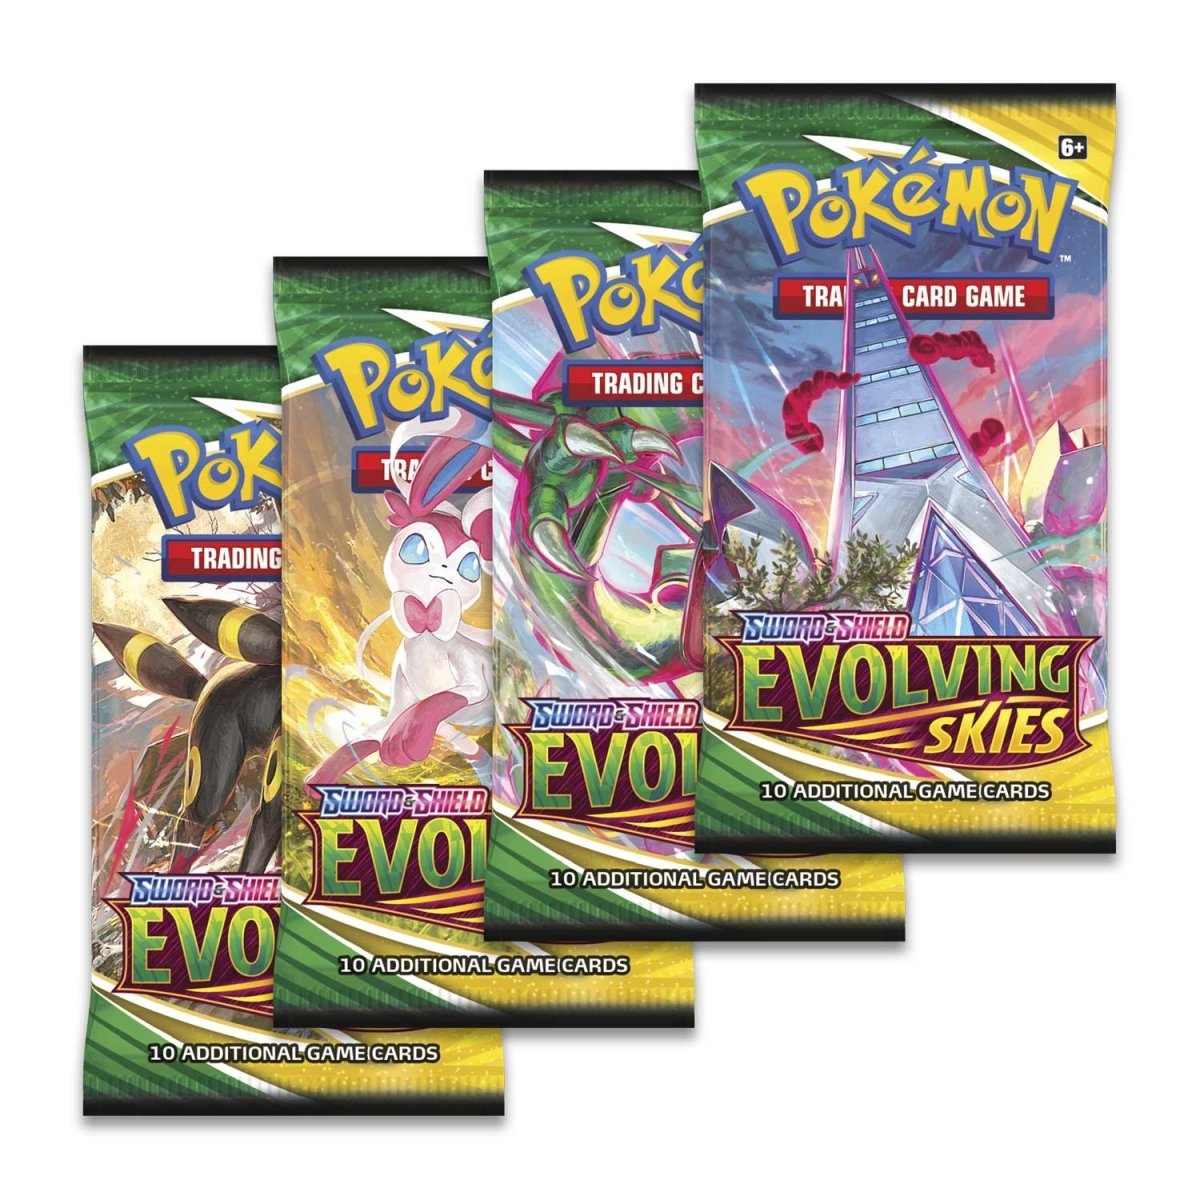 Pokémon TCG booster box sets new record after being auctioned off for  $432,000